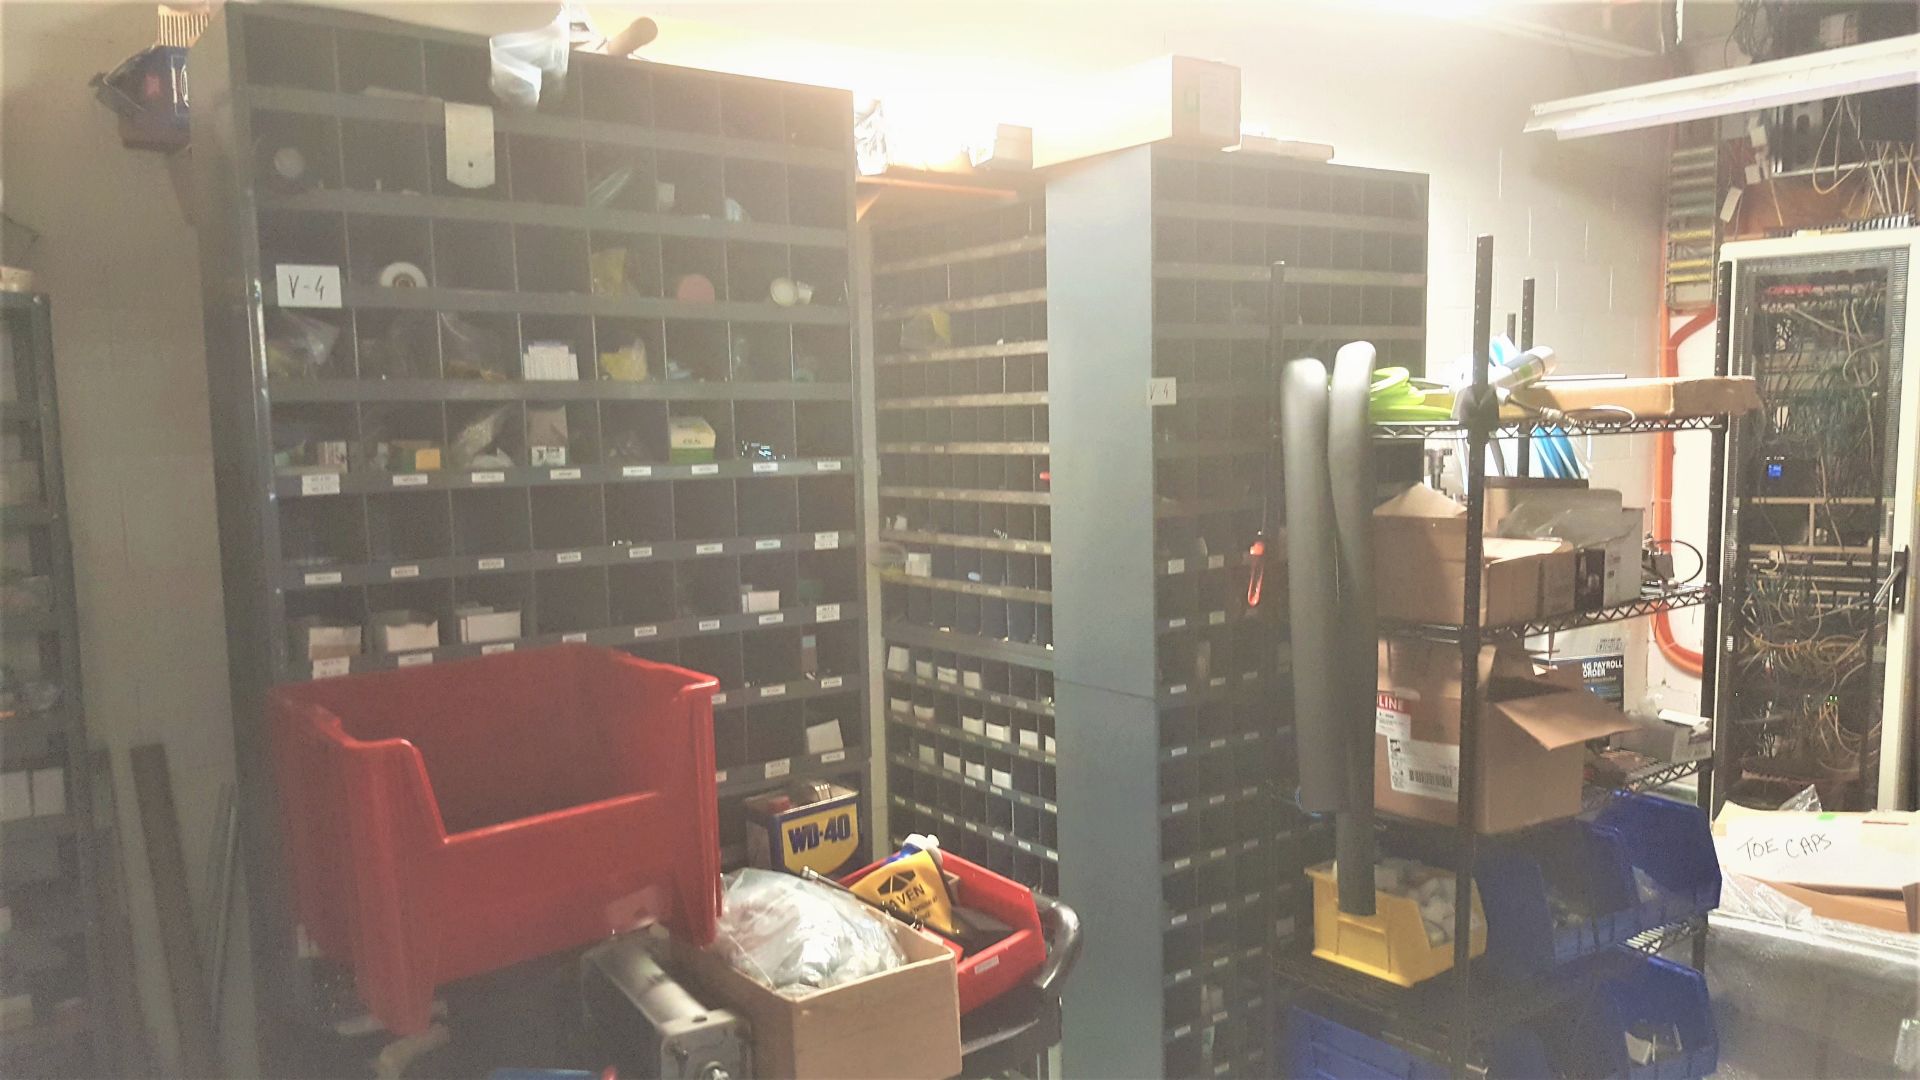 contents of room excluding computers. Including parts, supplies and stores, cabinets, with contents